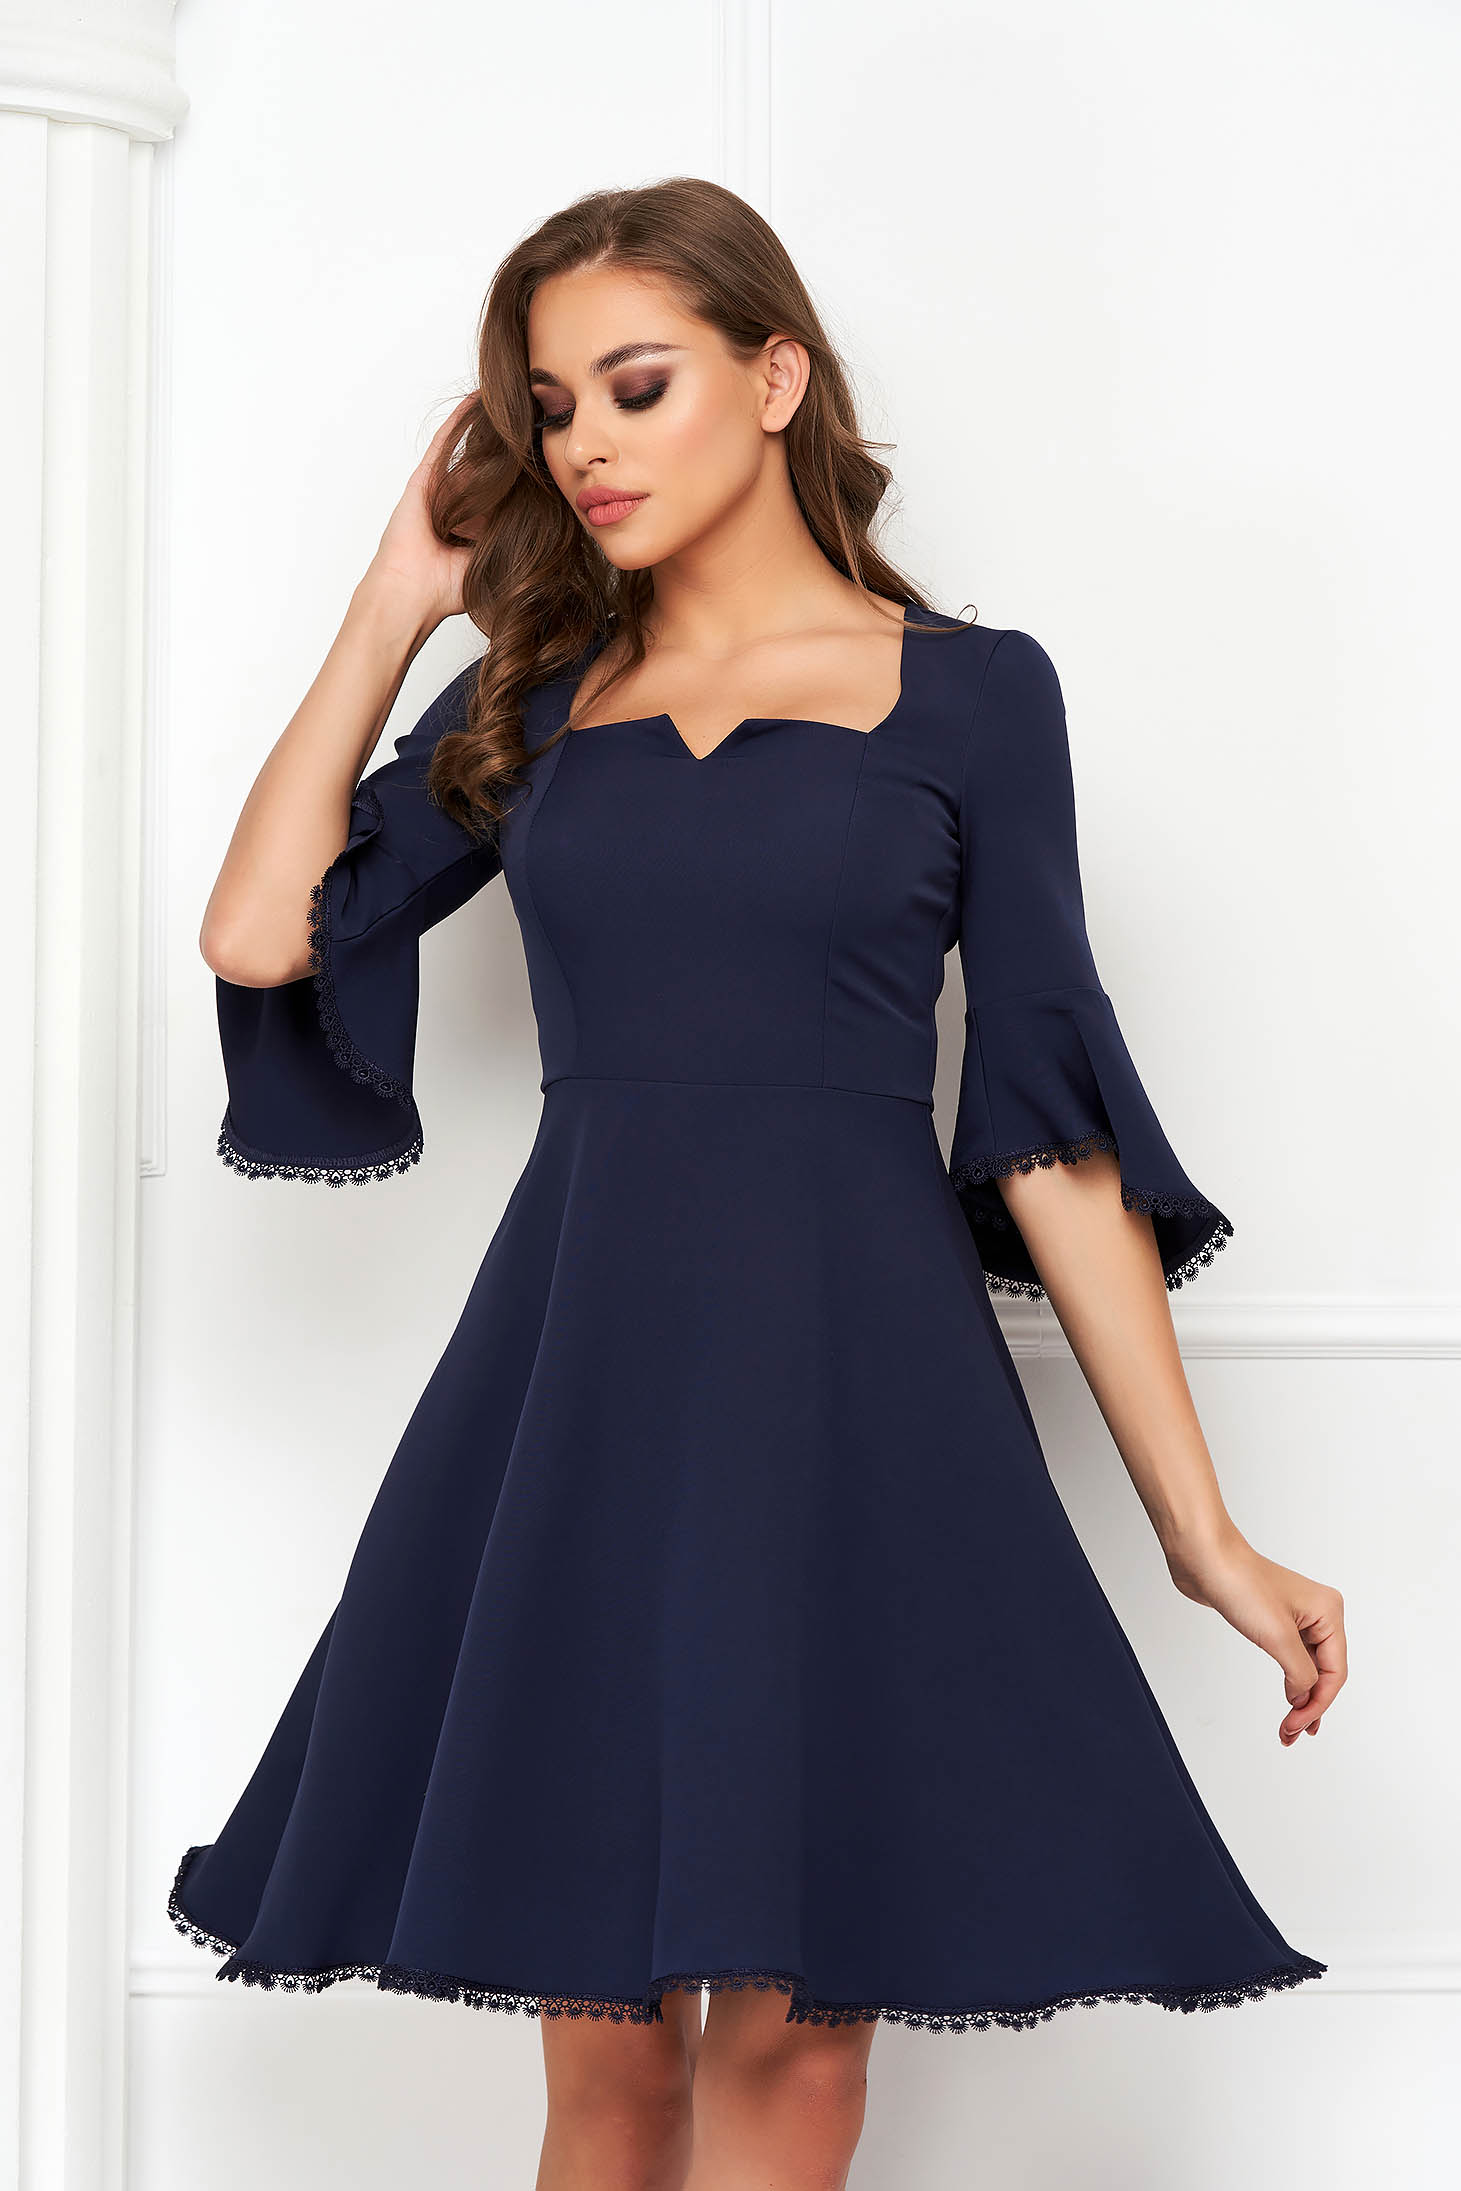 Navy Blue Elastic Fabric Dress in A-line with Ruffles on the Sleeve - StarShinerS 1 - StarShinerS.com